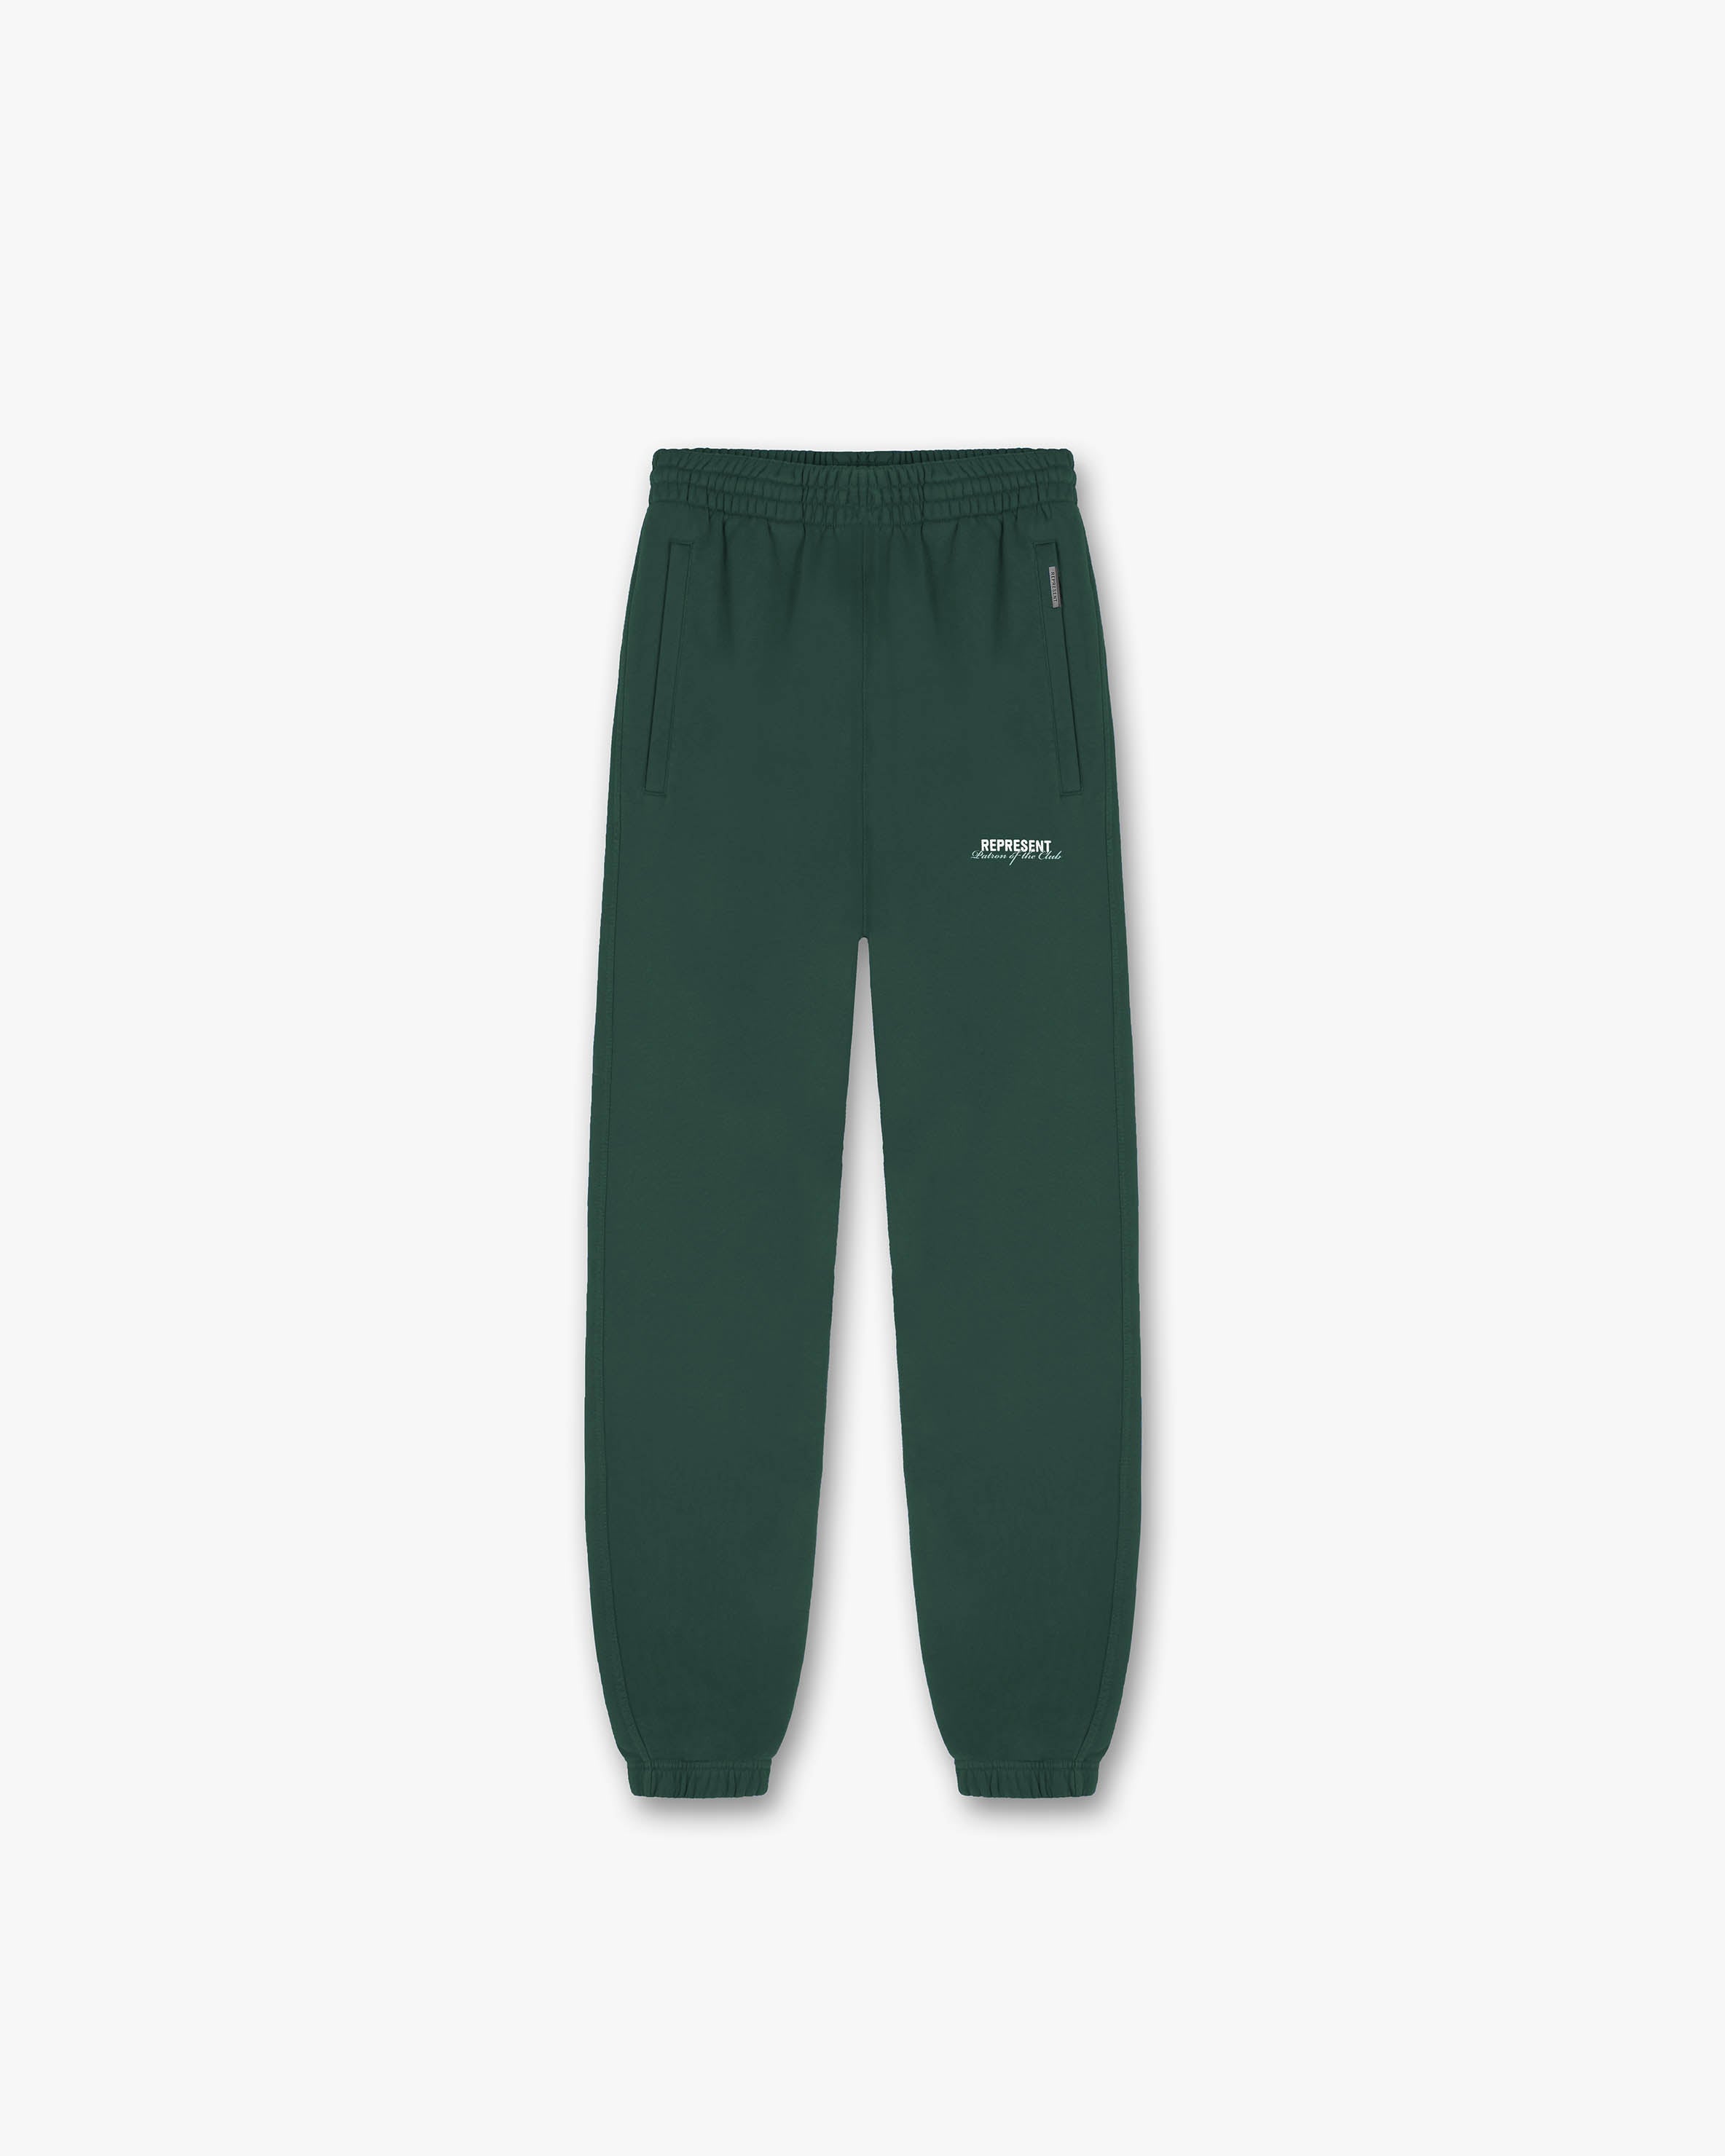 Represent Patron Of The Club Sweatpant Forest Green